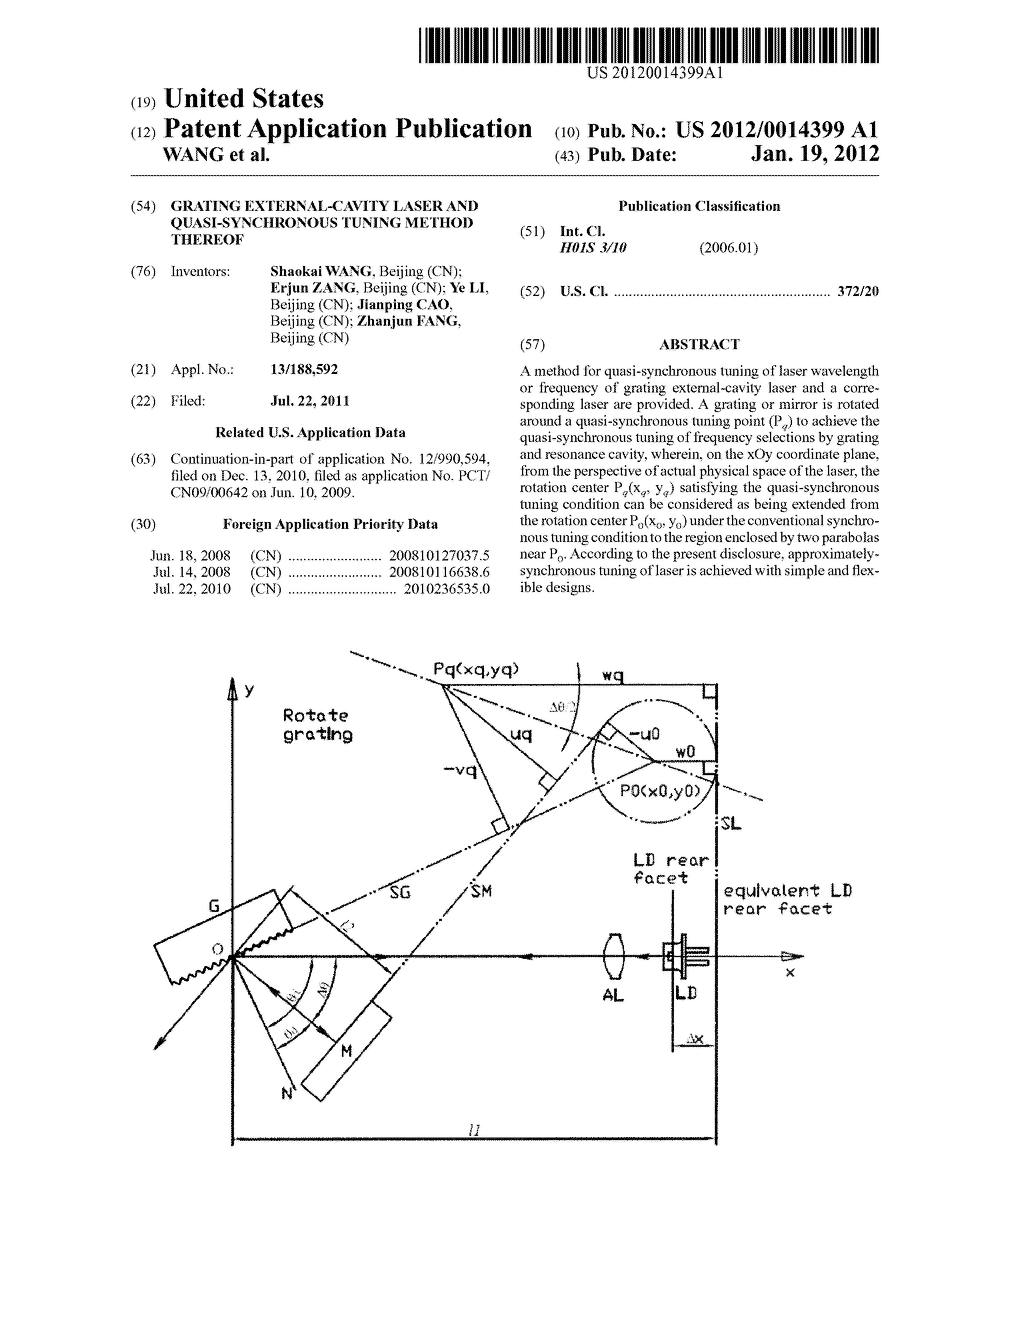 Grating External-Cavity Laser and Quasi-Synchronous Tuning Method Thereof - diagram, schematic, and image 01